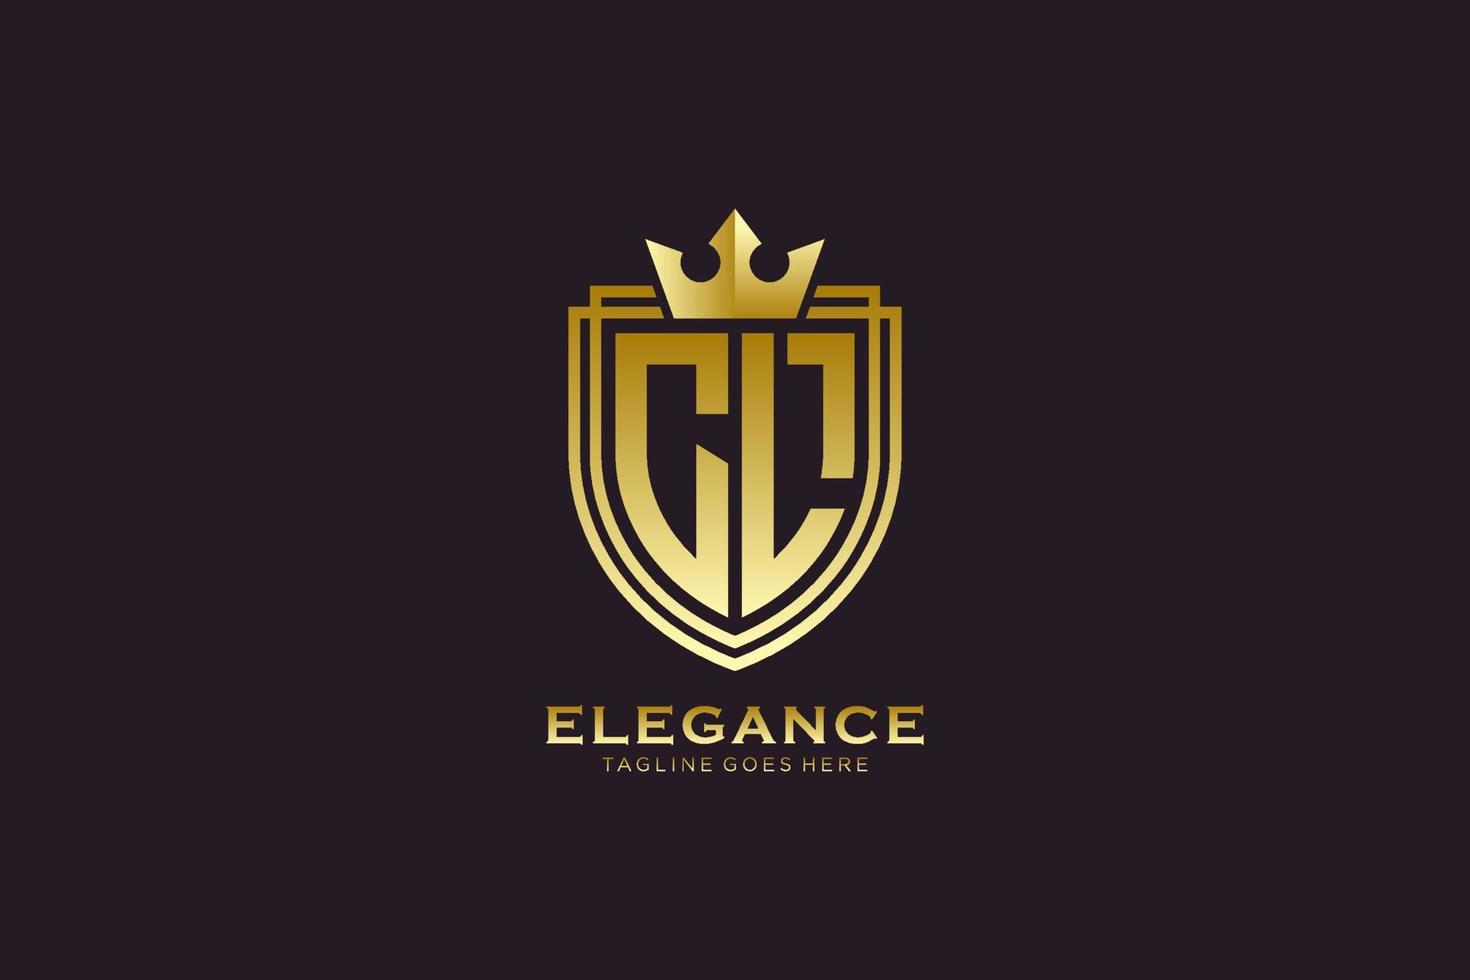 initial CL elegant luxury monogram logo or badge template with scrolls and royal crown - perfect for luxurious branding projects vector